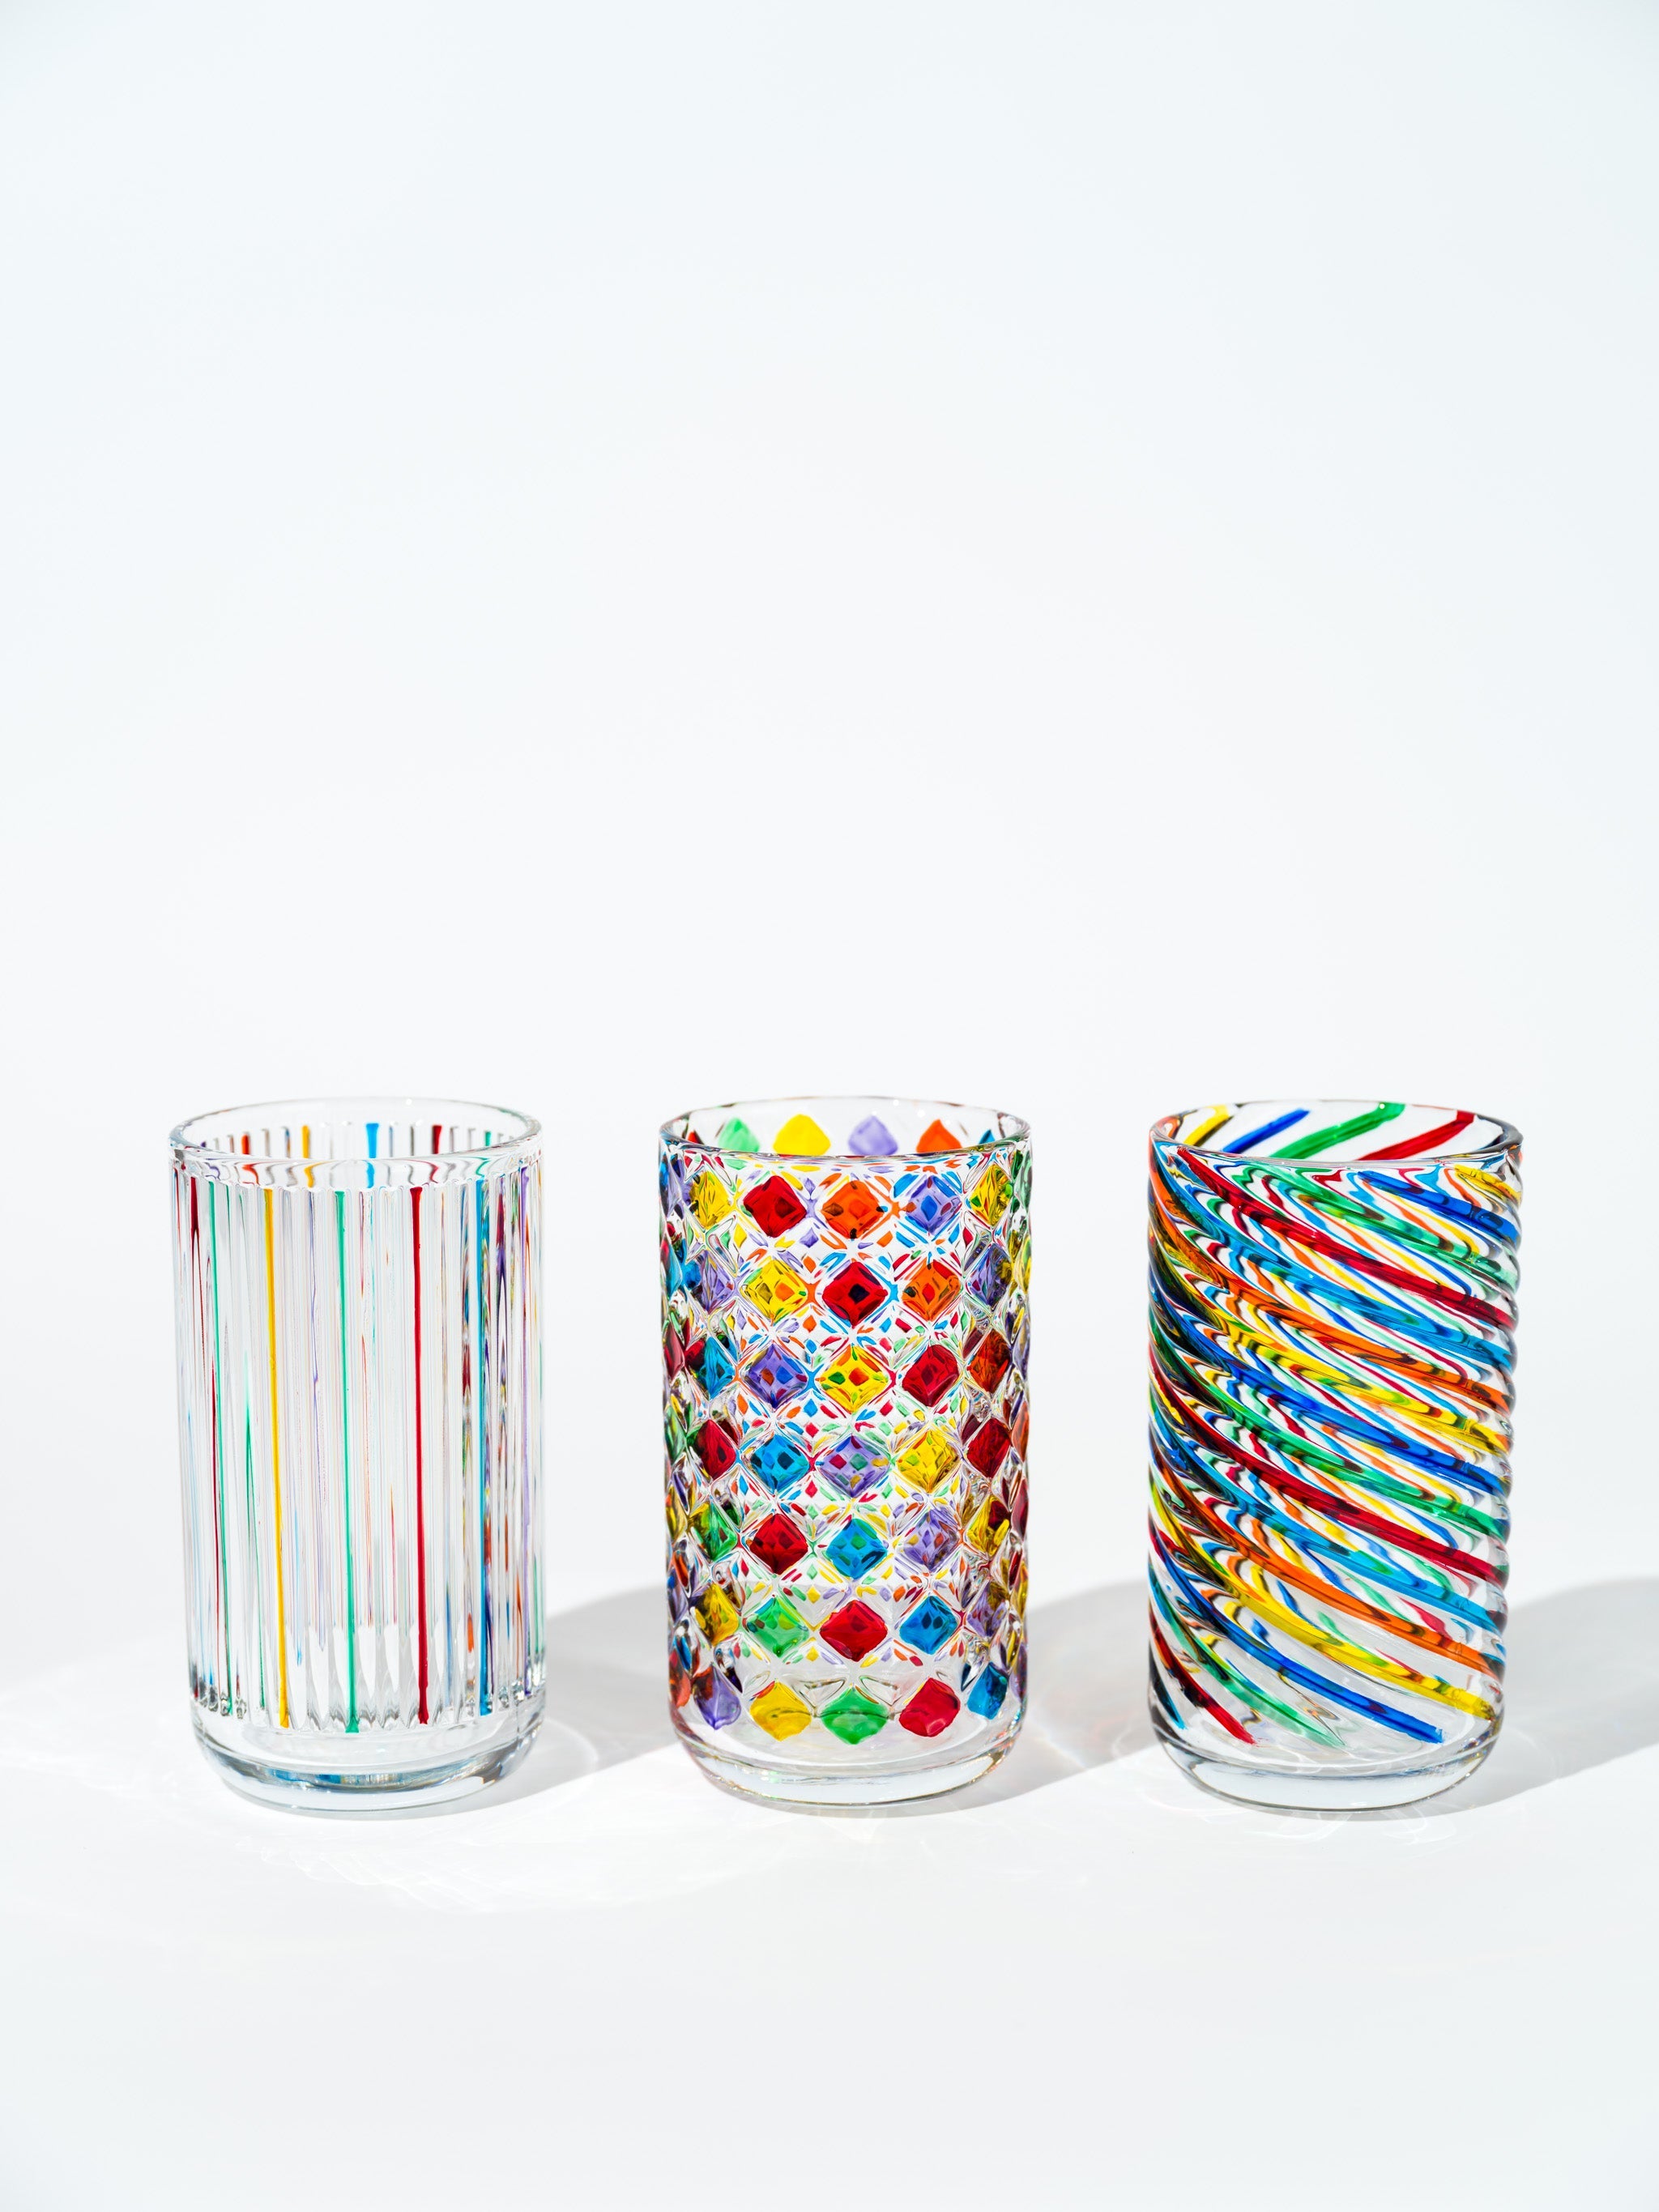 Prismatic Colored Drinking Glass, Spiral